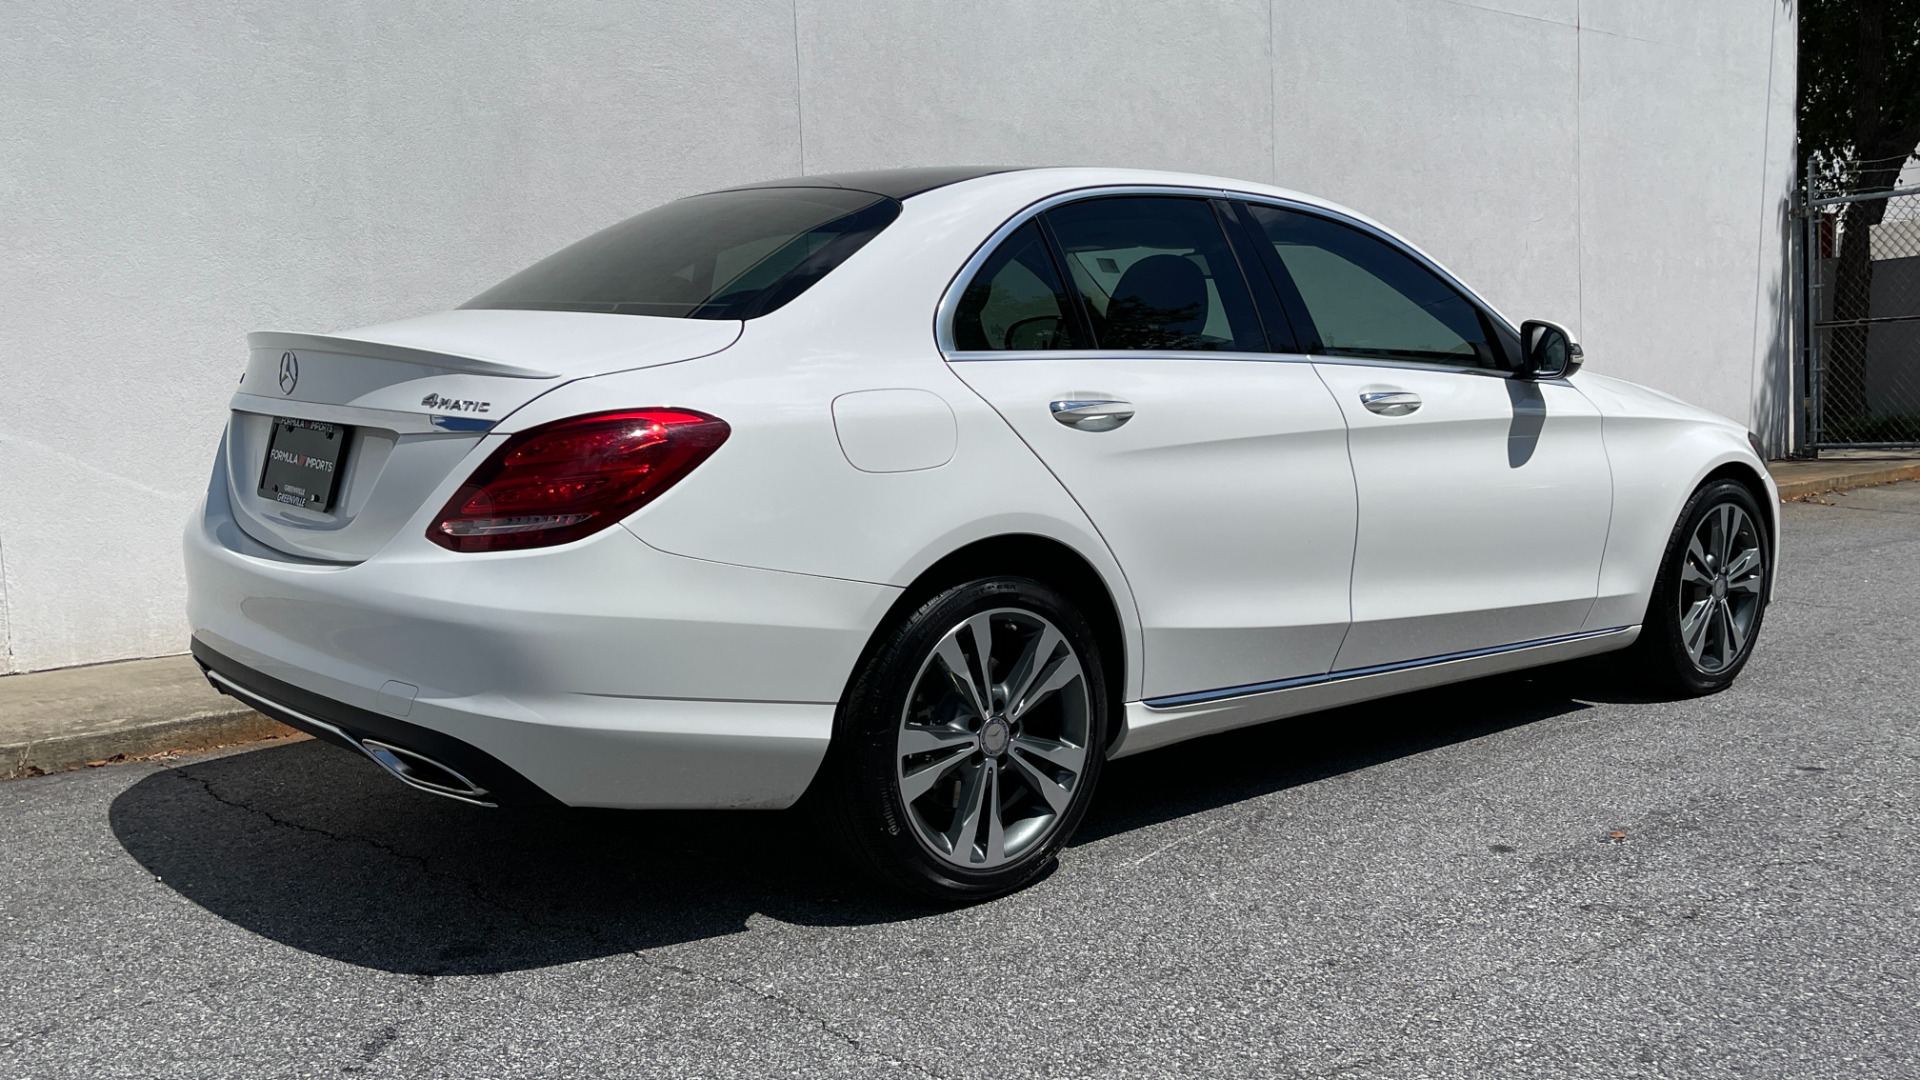 Used 2016 Mercedes-Benz C-Class C300 / 4MATIC / PREMIUM / LINDEN WOOD / ILLUMINATED STAR / MULTIMEDIA for sale $25,995 at Formula Imports in Charlotte NC 28227 3